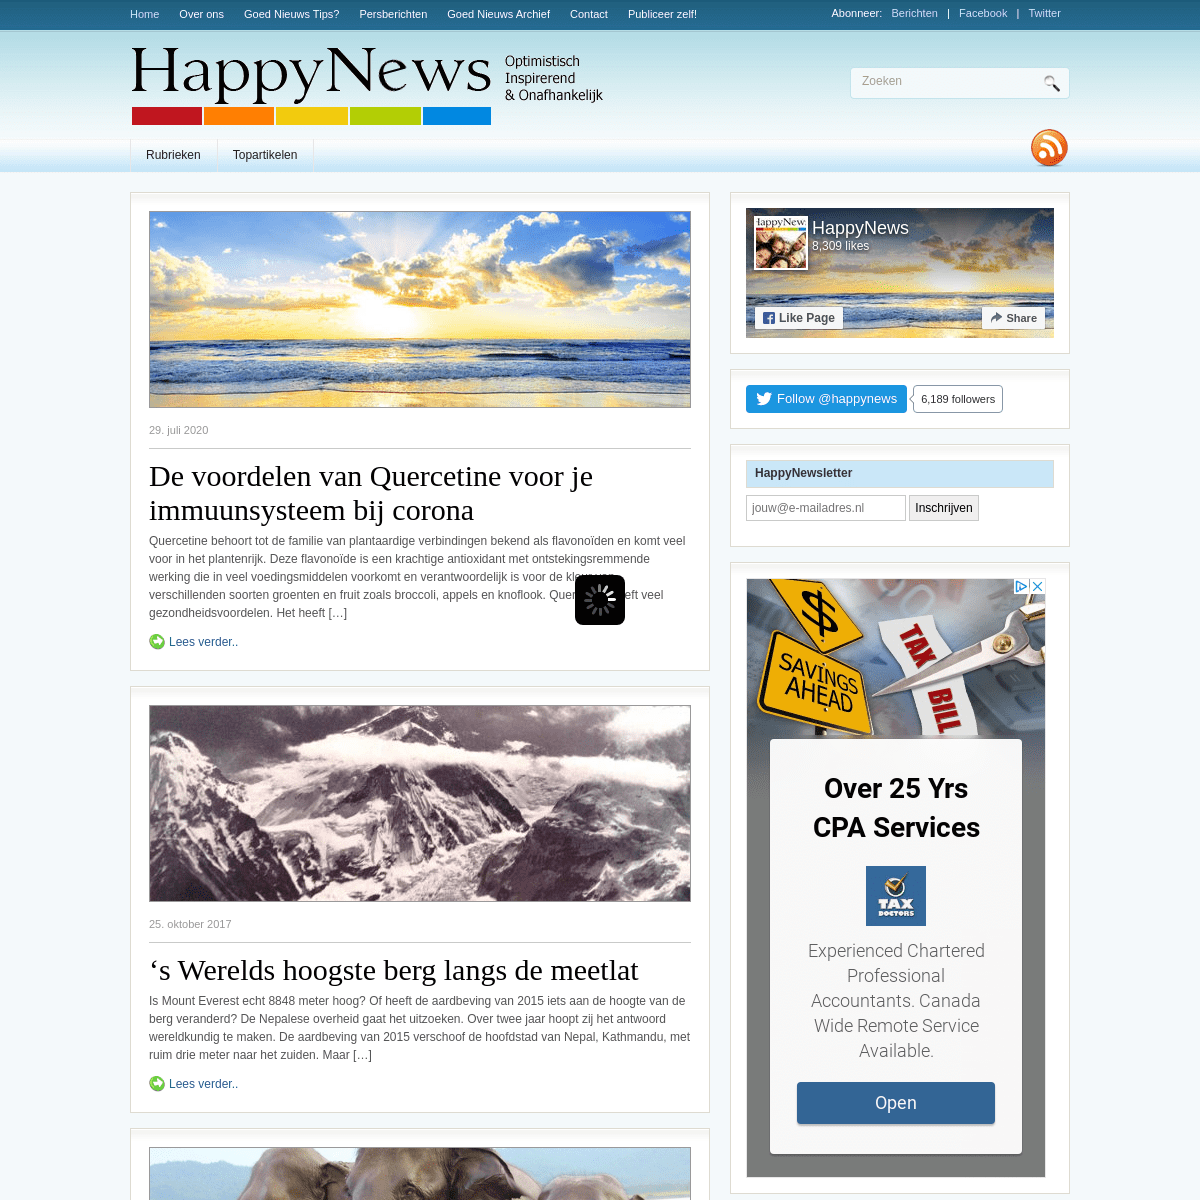 A complete backup of https://happynews.nl